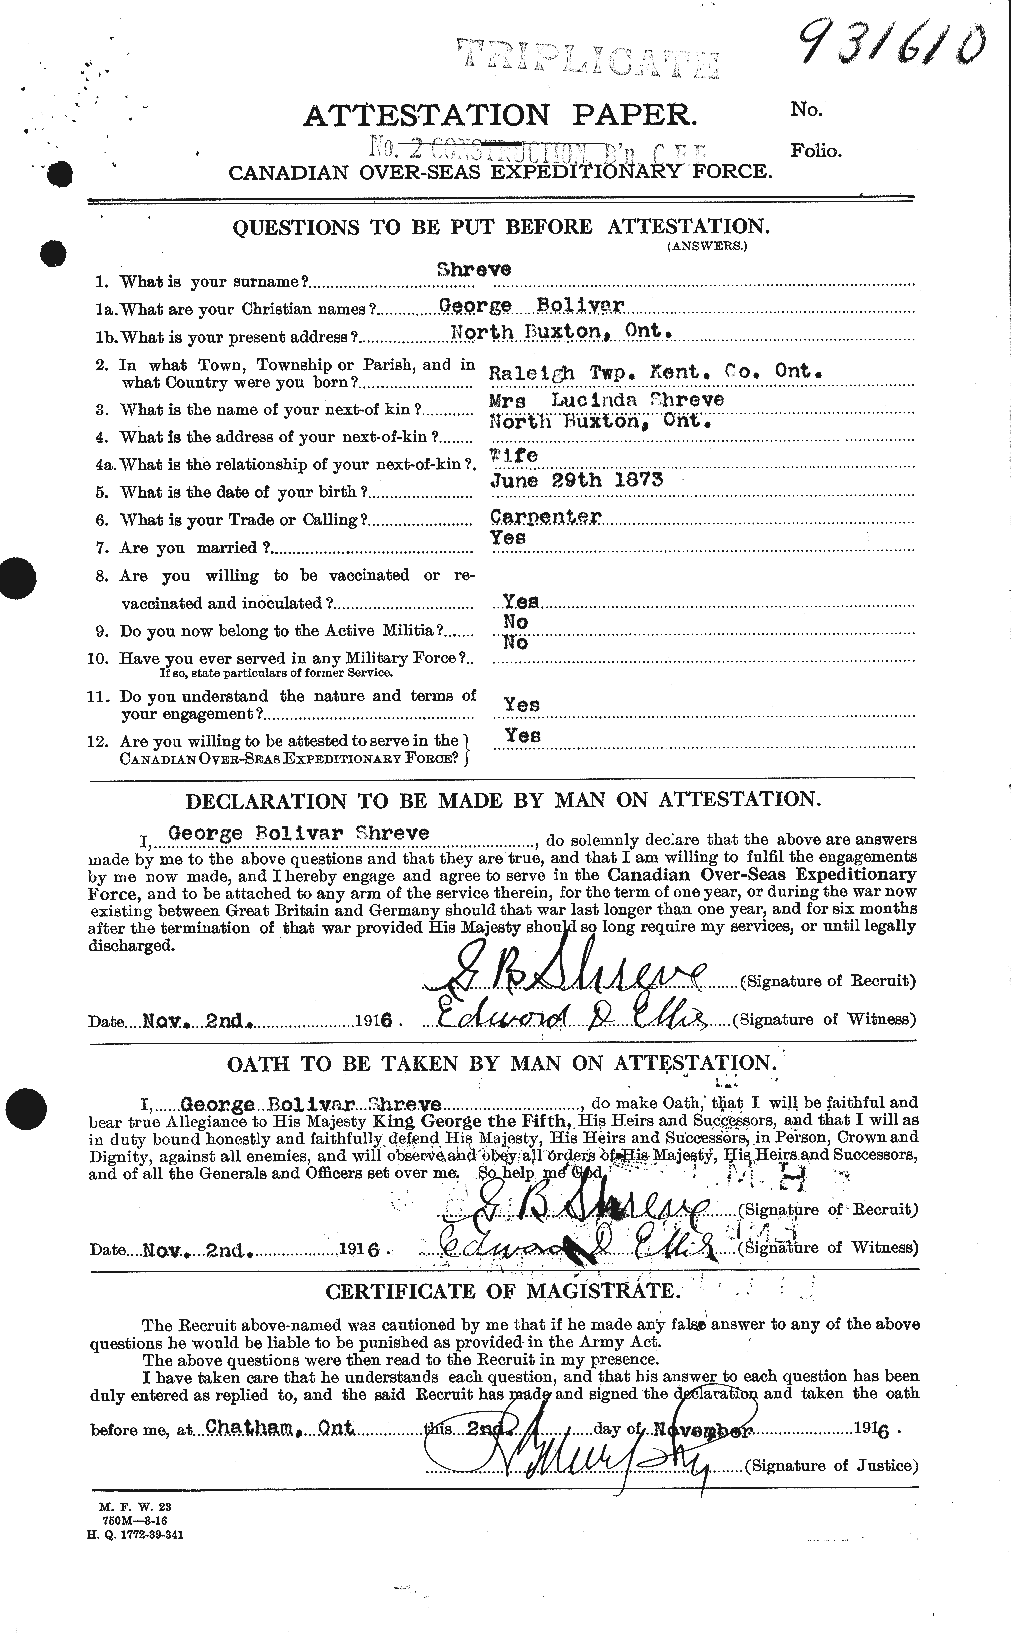 Personnel Records of the First World War - CEF 092472a